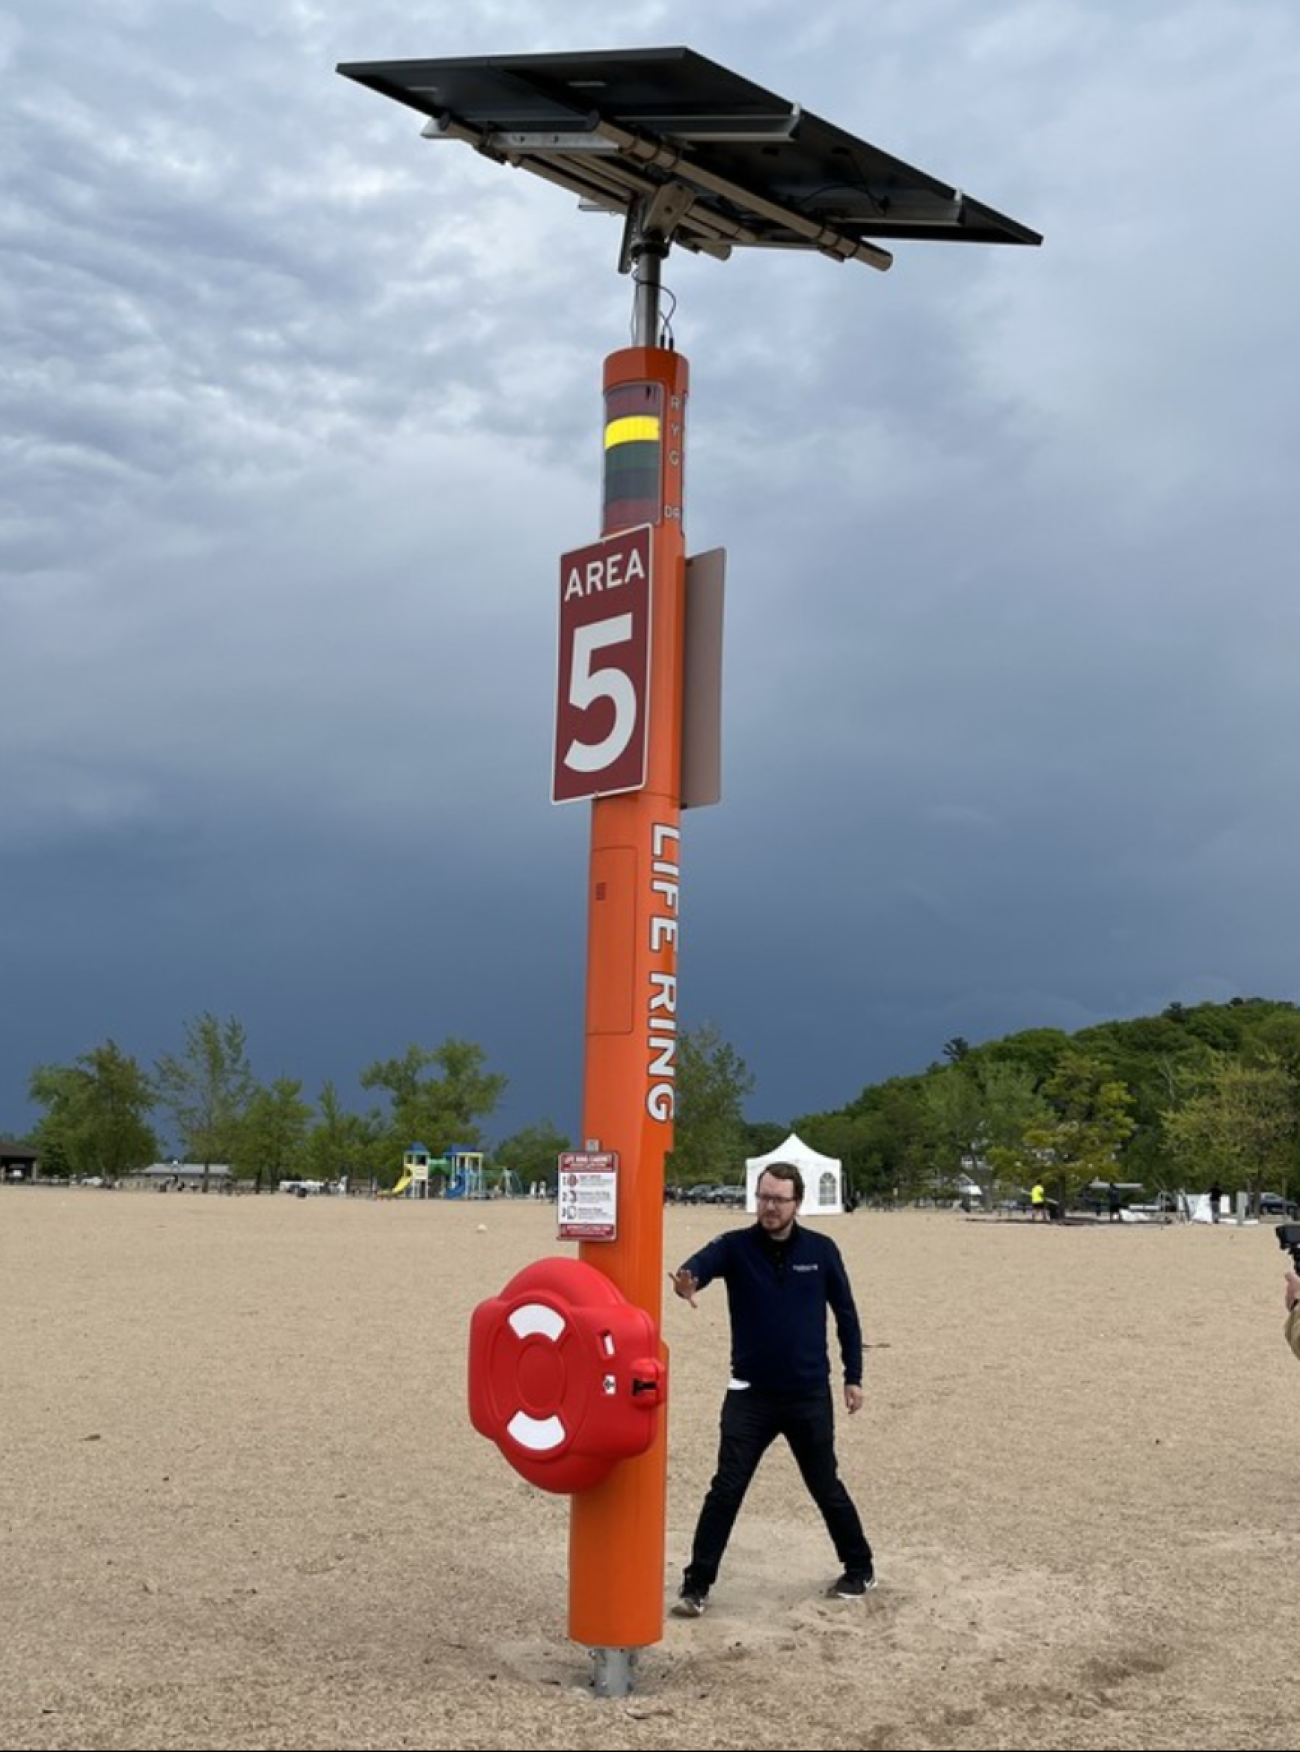 An orange pole on the beach. A man is standing by it